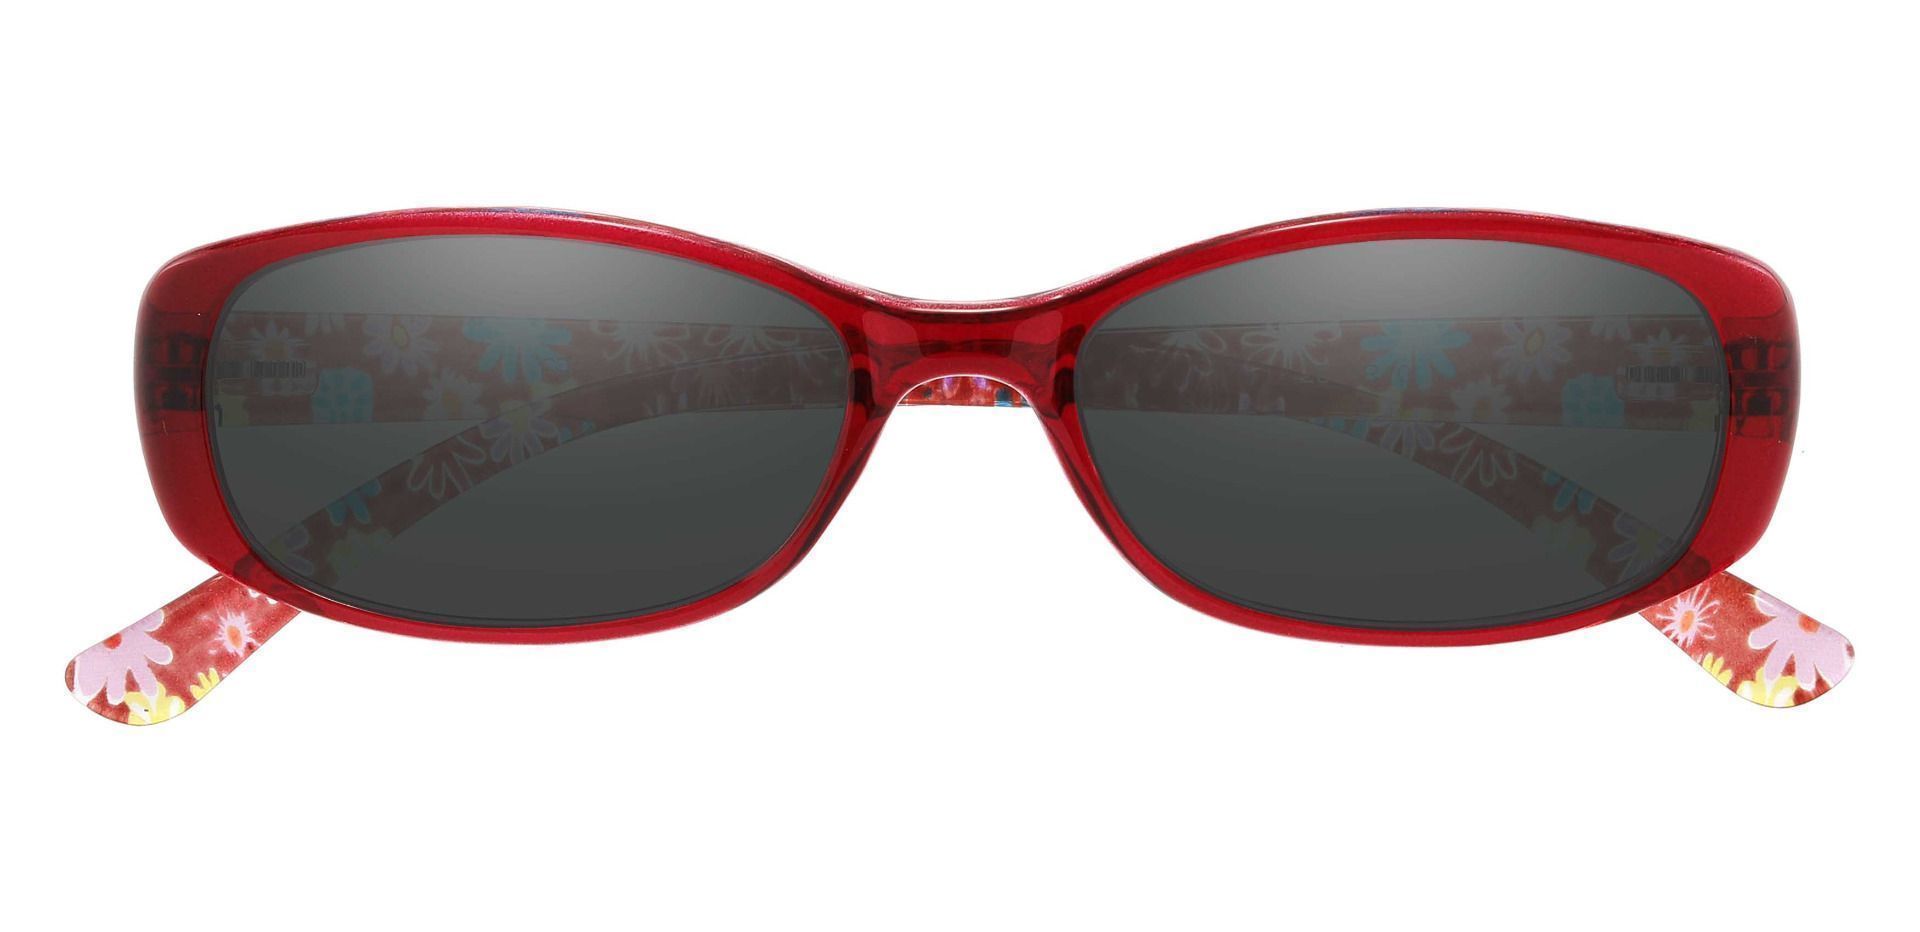 Bethesda Rectangle Lined Bifocal Sunglasses - Red Frame With Gray Lenses